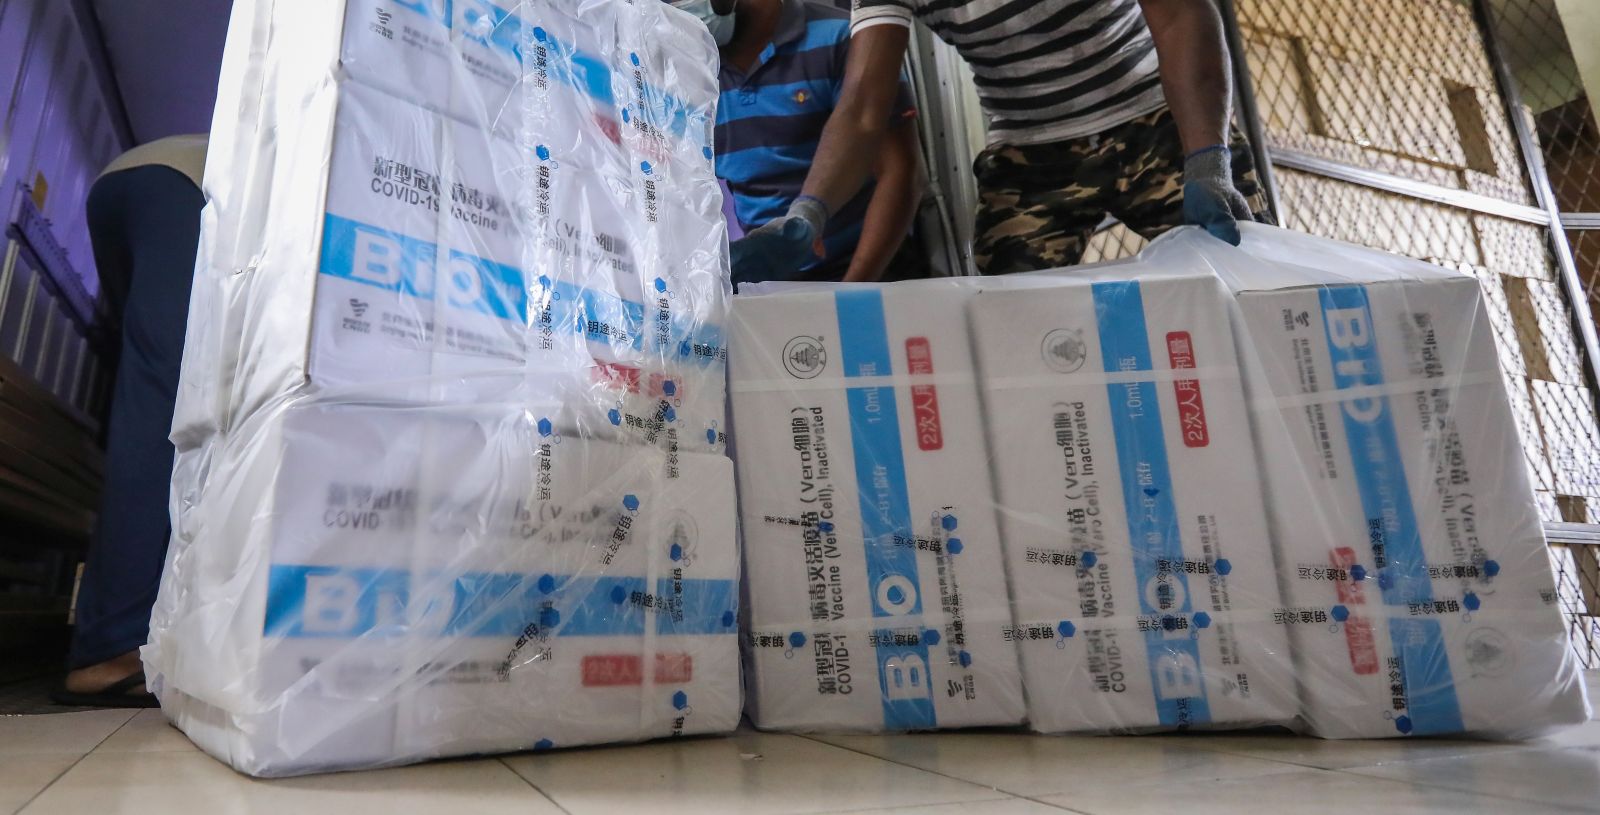 epa09369293 Sri Lankan workers unload a newly arrived shipment of the Chinese Sinopharm Covid-19 vaccine at the Medical Supplies Division in Colombo, Sri Lanka, 27  July 2021. According to the health ministry, the Chinese government donated 1.6 million doses of the Chinese Sinopharm Covid-19 vaccine to Sri Lanka on 27 July 2021. Sri Lanka is currently using Oxford AstraZeneca, China's Sinopharm, Russian Sputnik V, and Moderna Covid -19 vaccines for the Vaccine rollout.  EPA/CHAMILA KARUNARATHNE